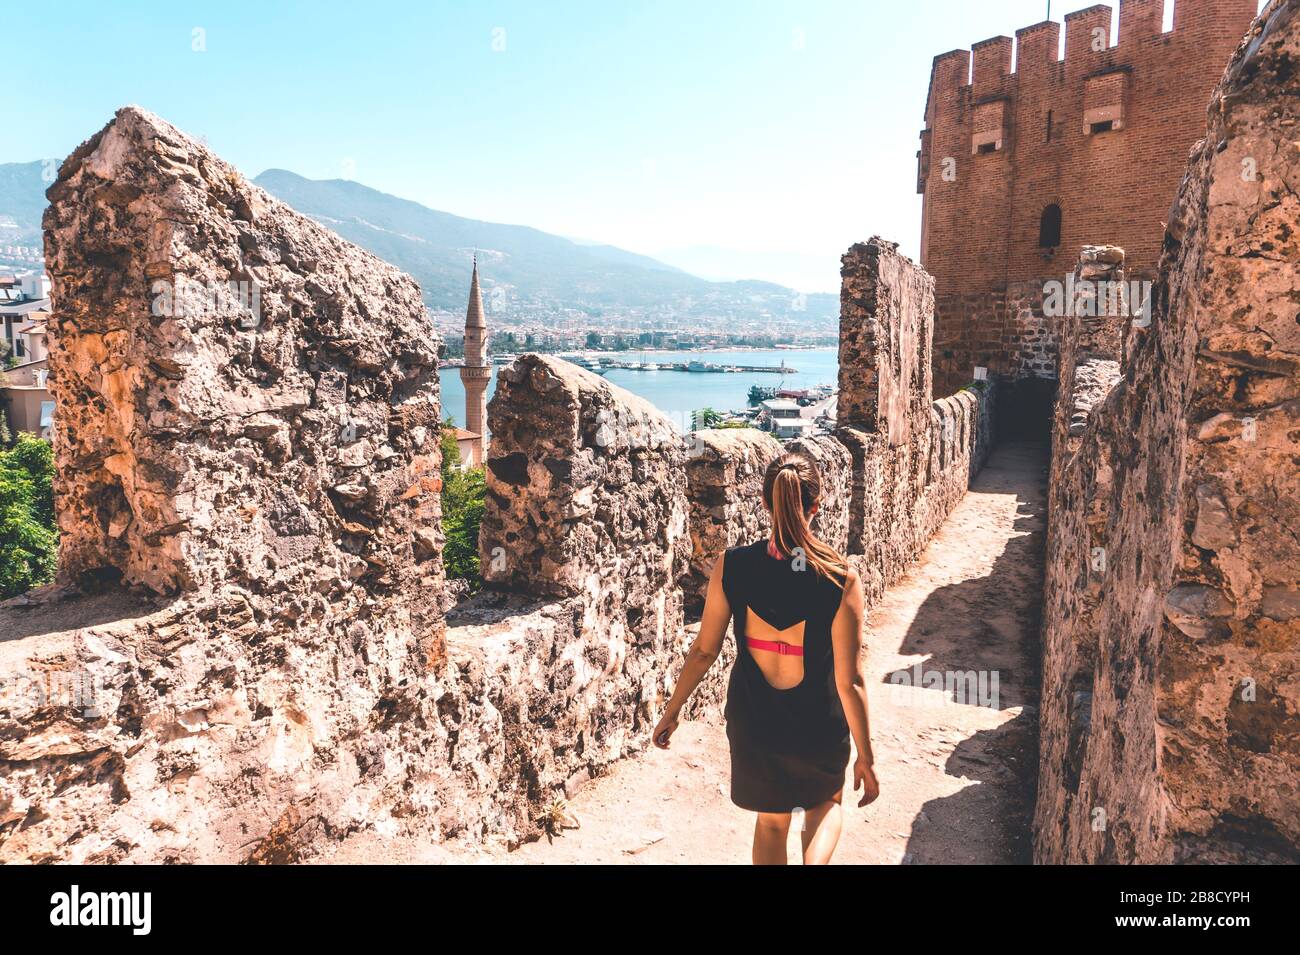 Traveler exploring the city of Alanya in Turkey. Woman walking and discovering old landmark in Europe. Tourist sightseeing in the Red Tower. Stock Photo